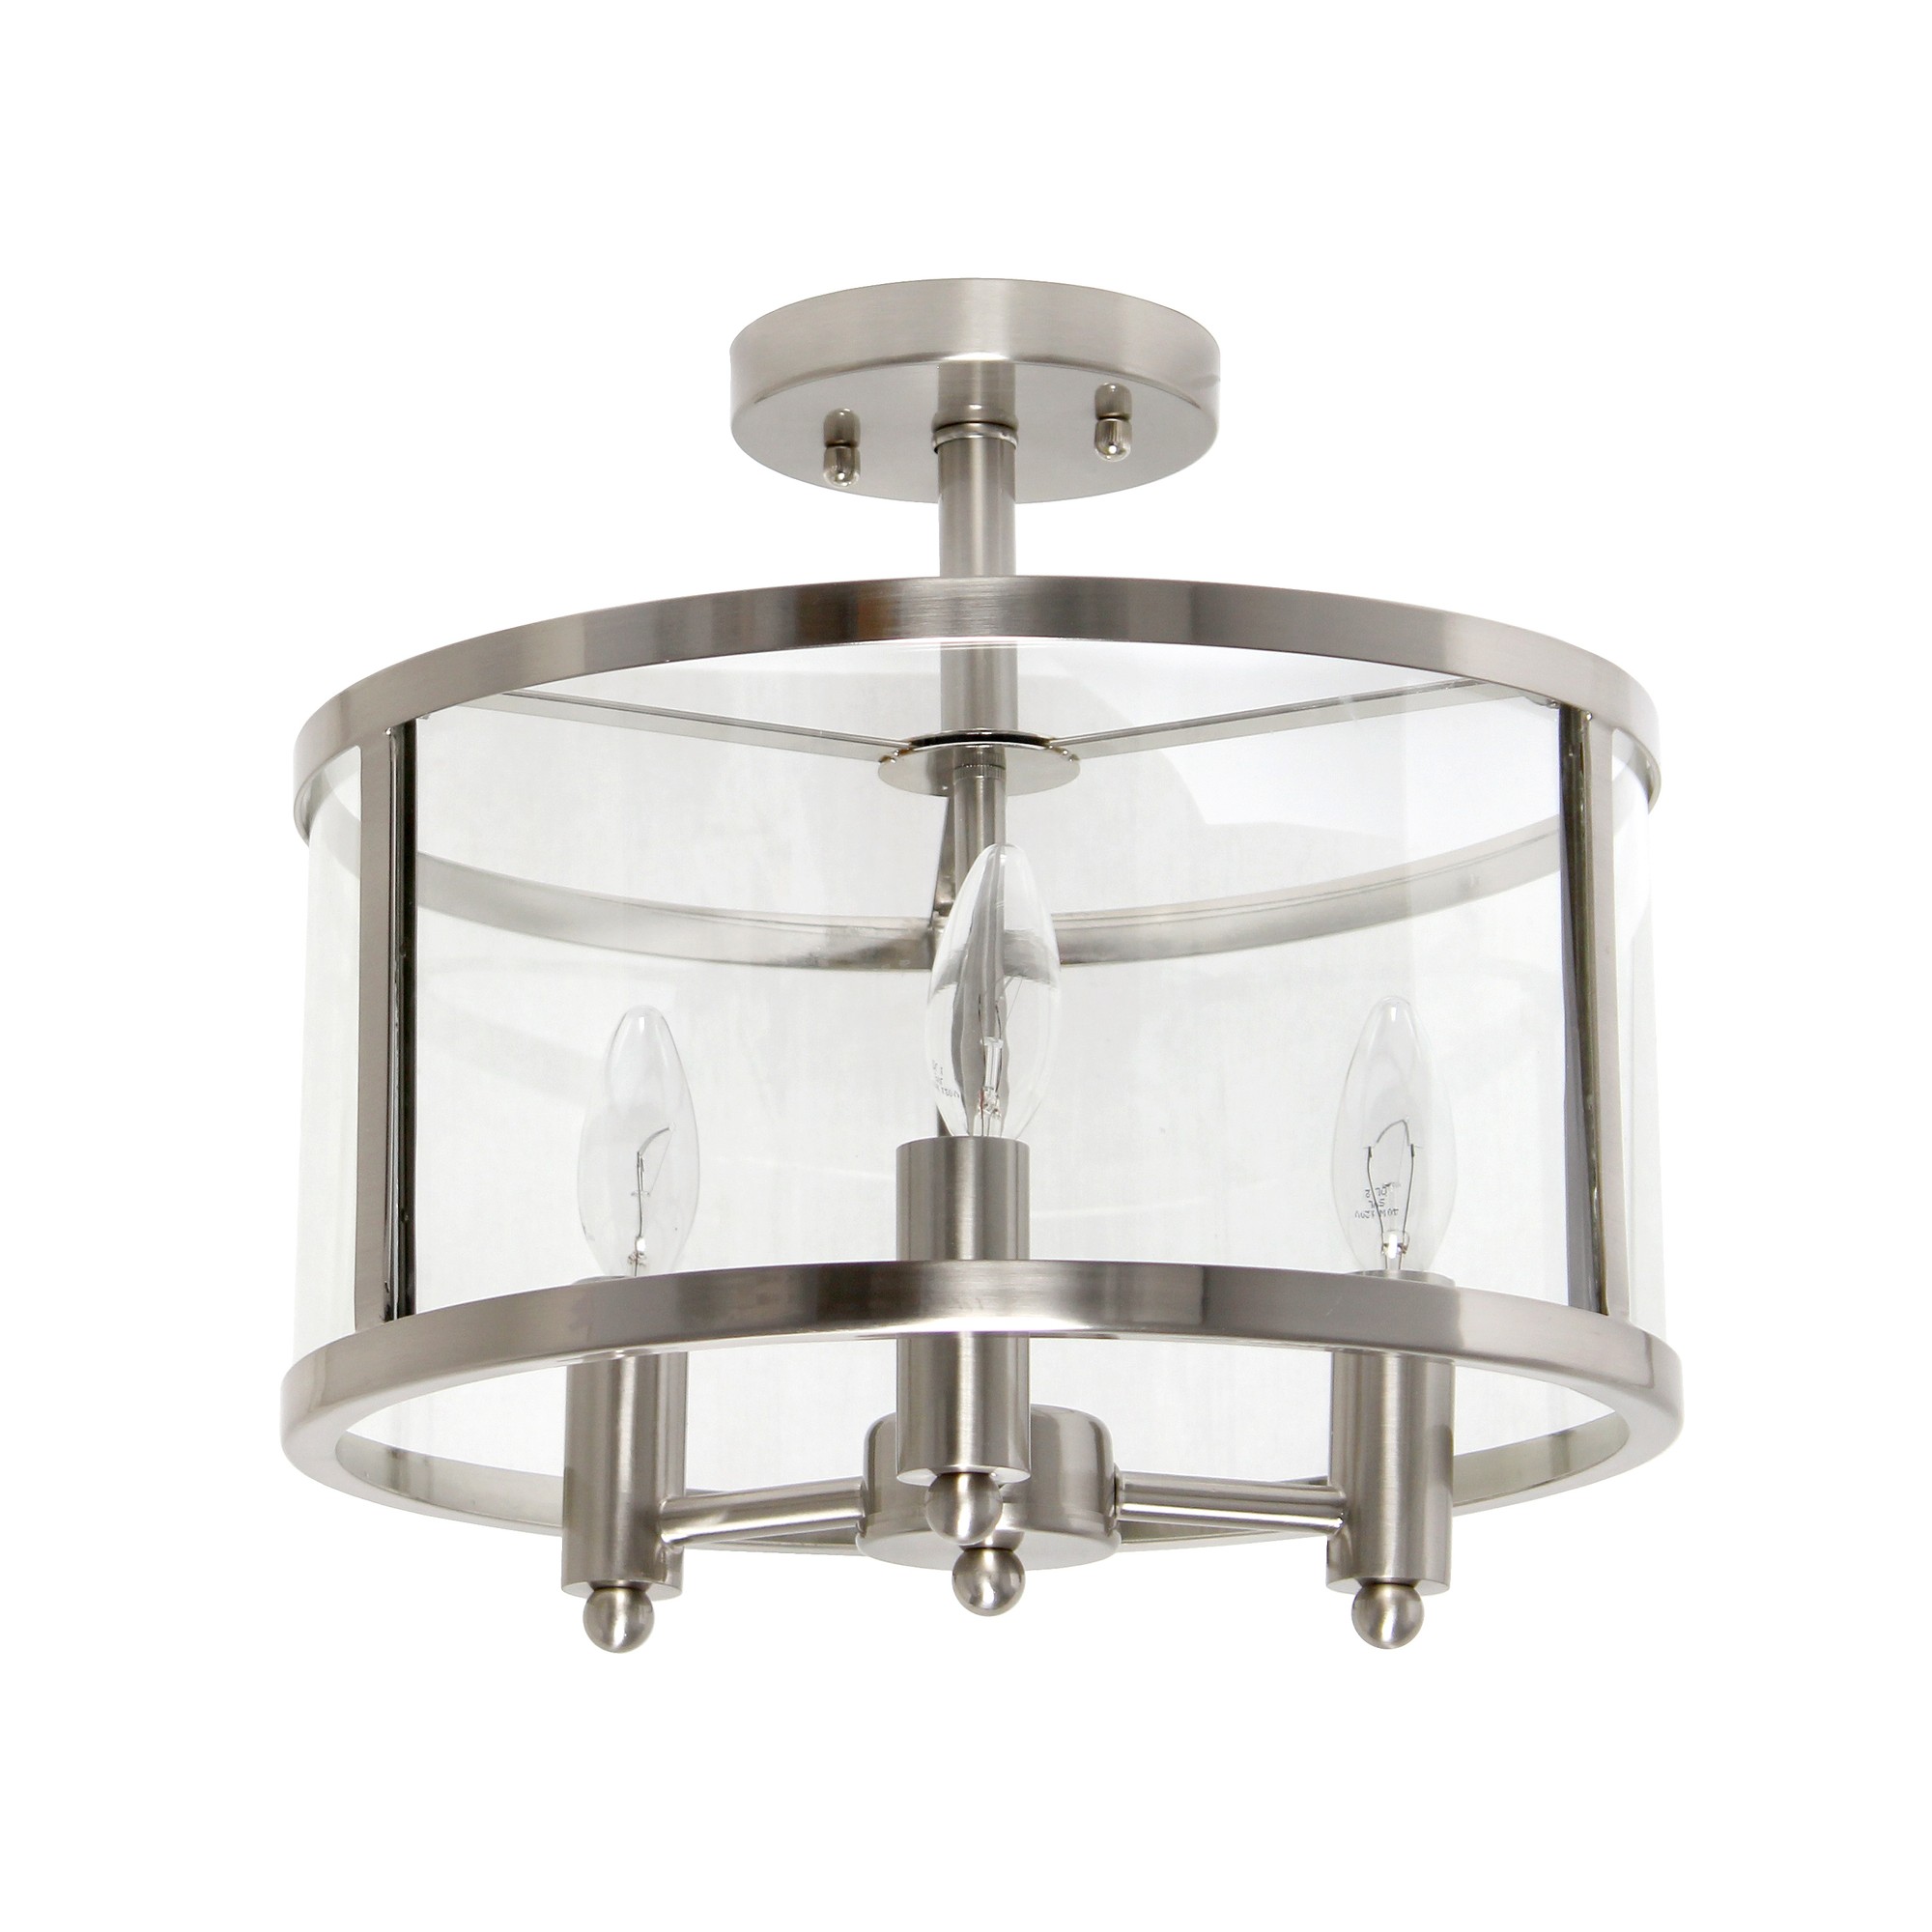 Lalia Home 3-Light 13" Industrial Farmhouse Glass and Metallic Accented Semi-flushmount, Brushed Nickel